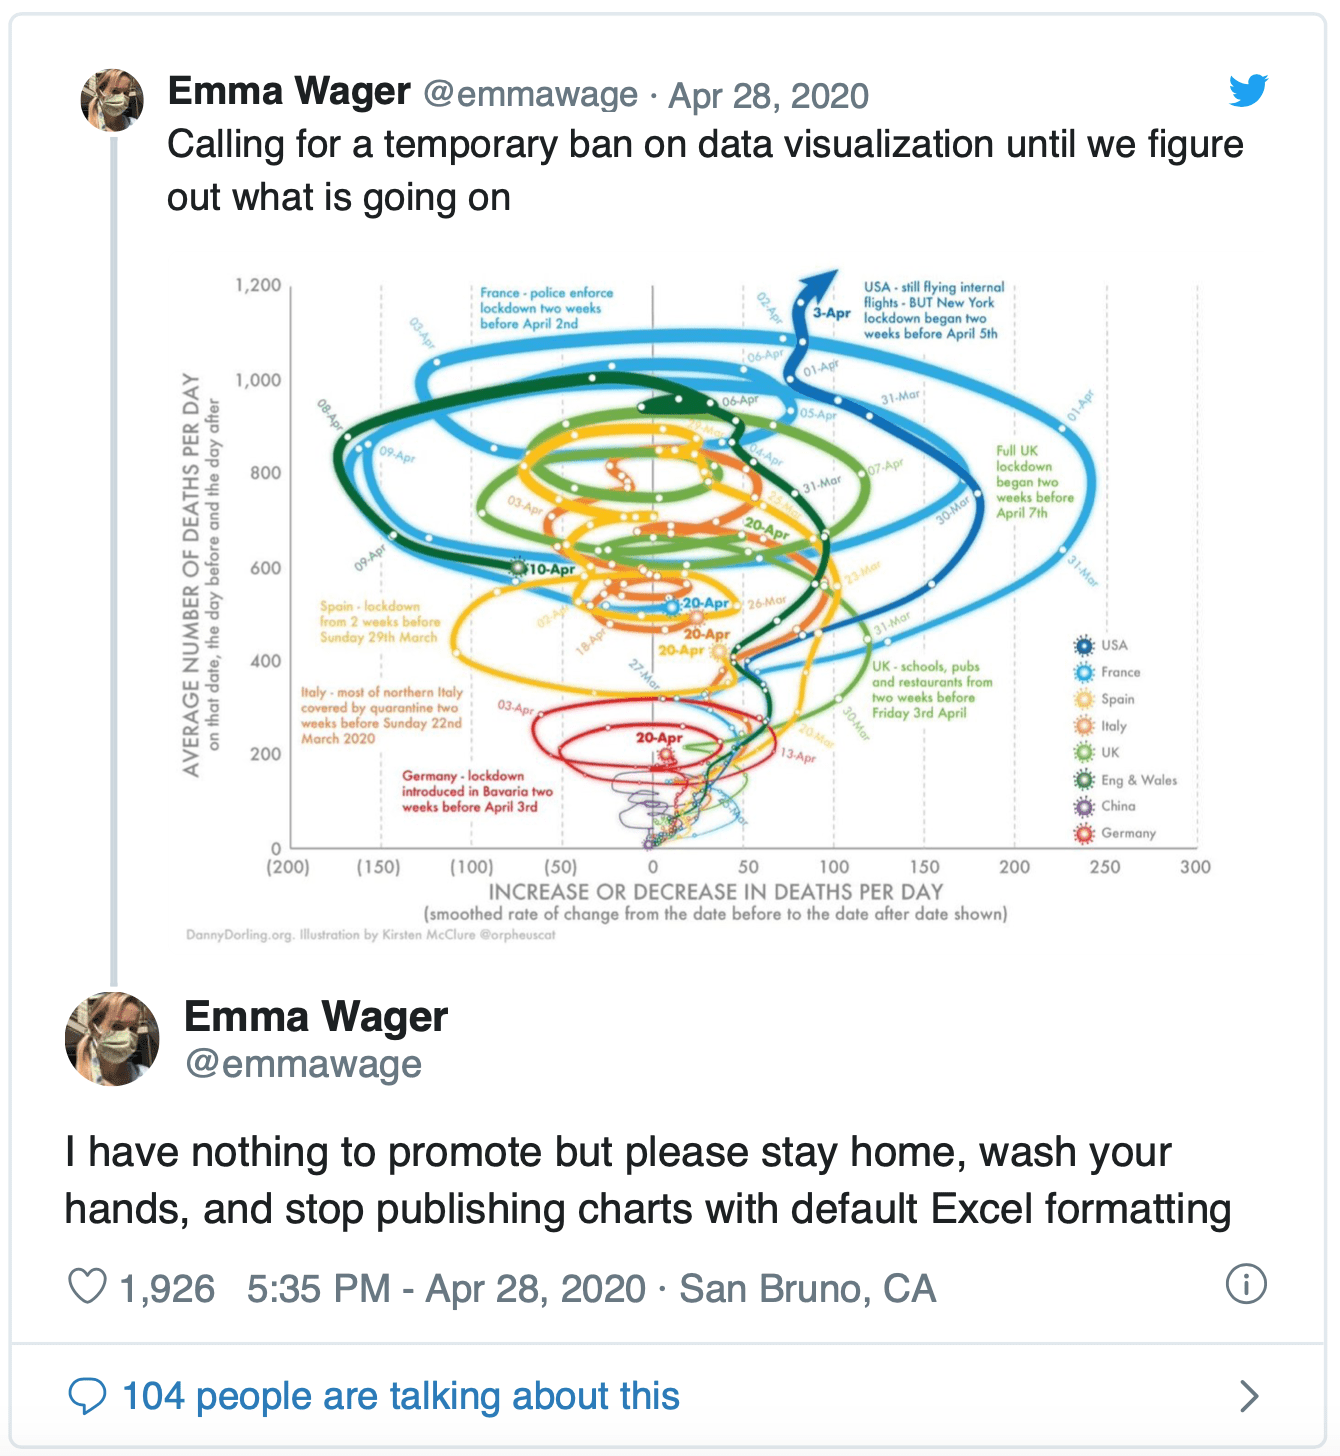 Tweet by Emma Wager: "Calling for a temporary ban on data visualization until we figure out what is going on [image of graph] I have nothing to promote but please stay home, wash your hands, and stop publishing charts with default Excel formatting"